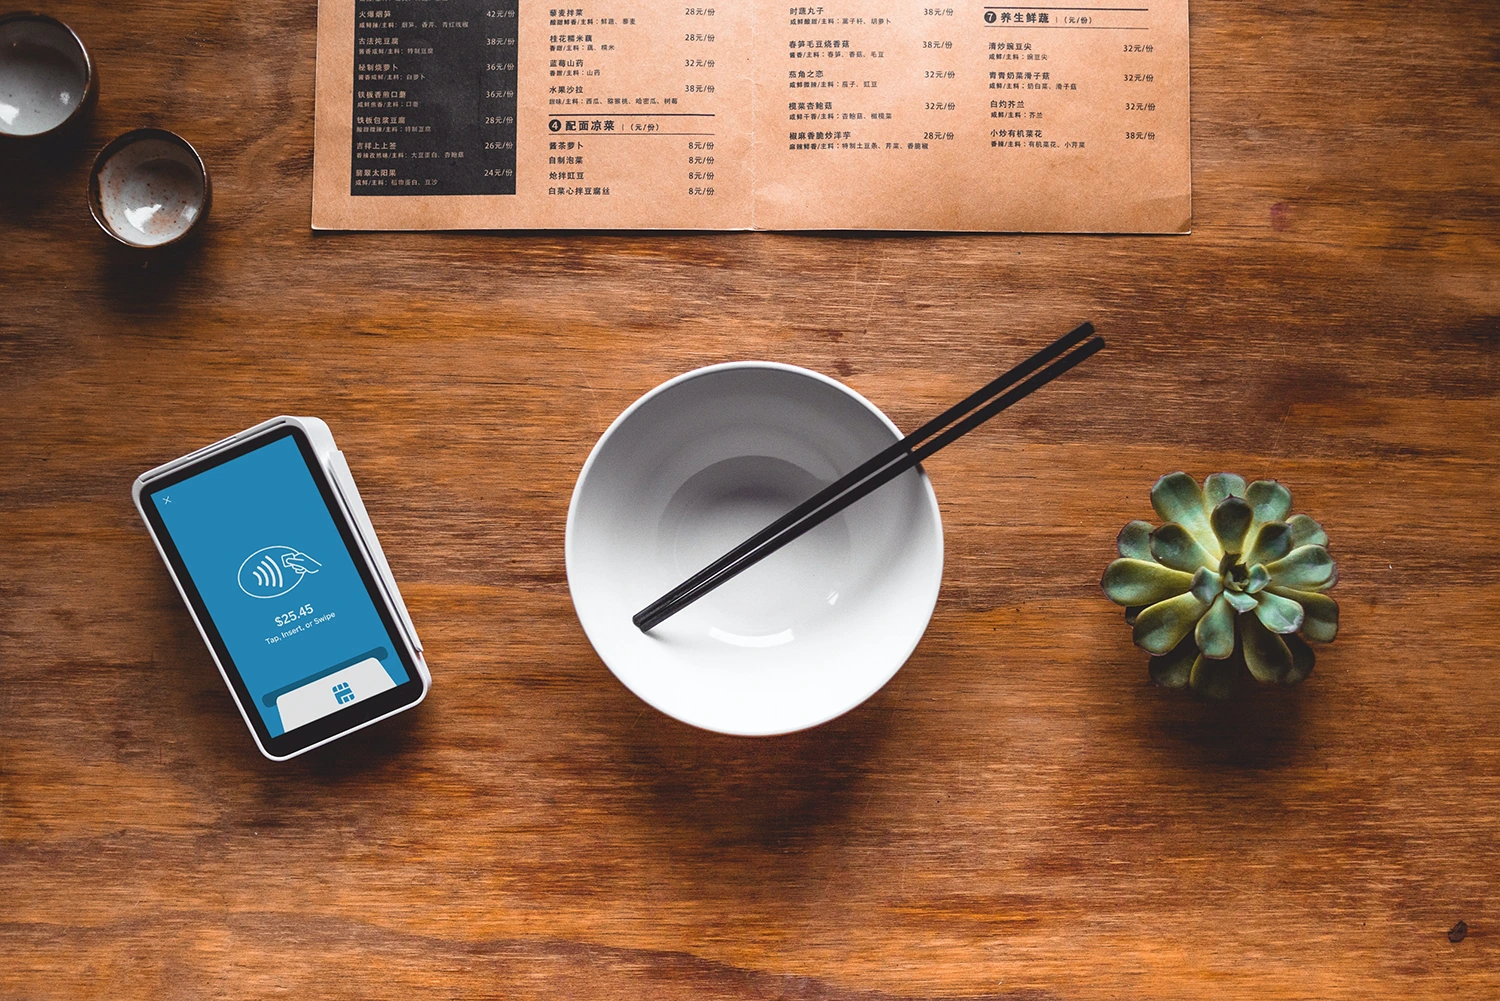 A phone, bowl, and chopsticks on a wooden table amidst menu pricing considerations.